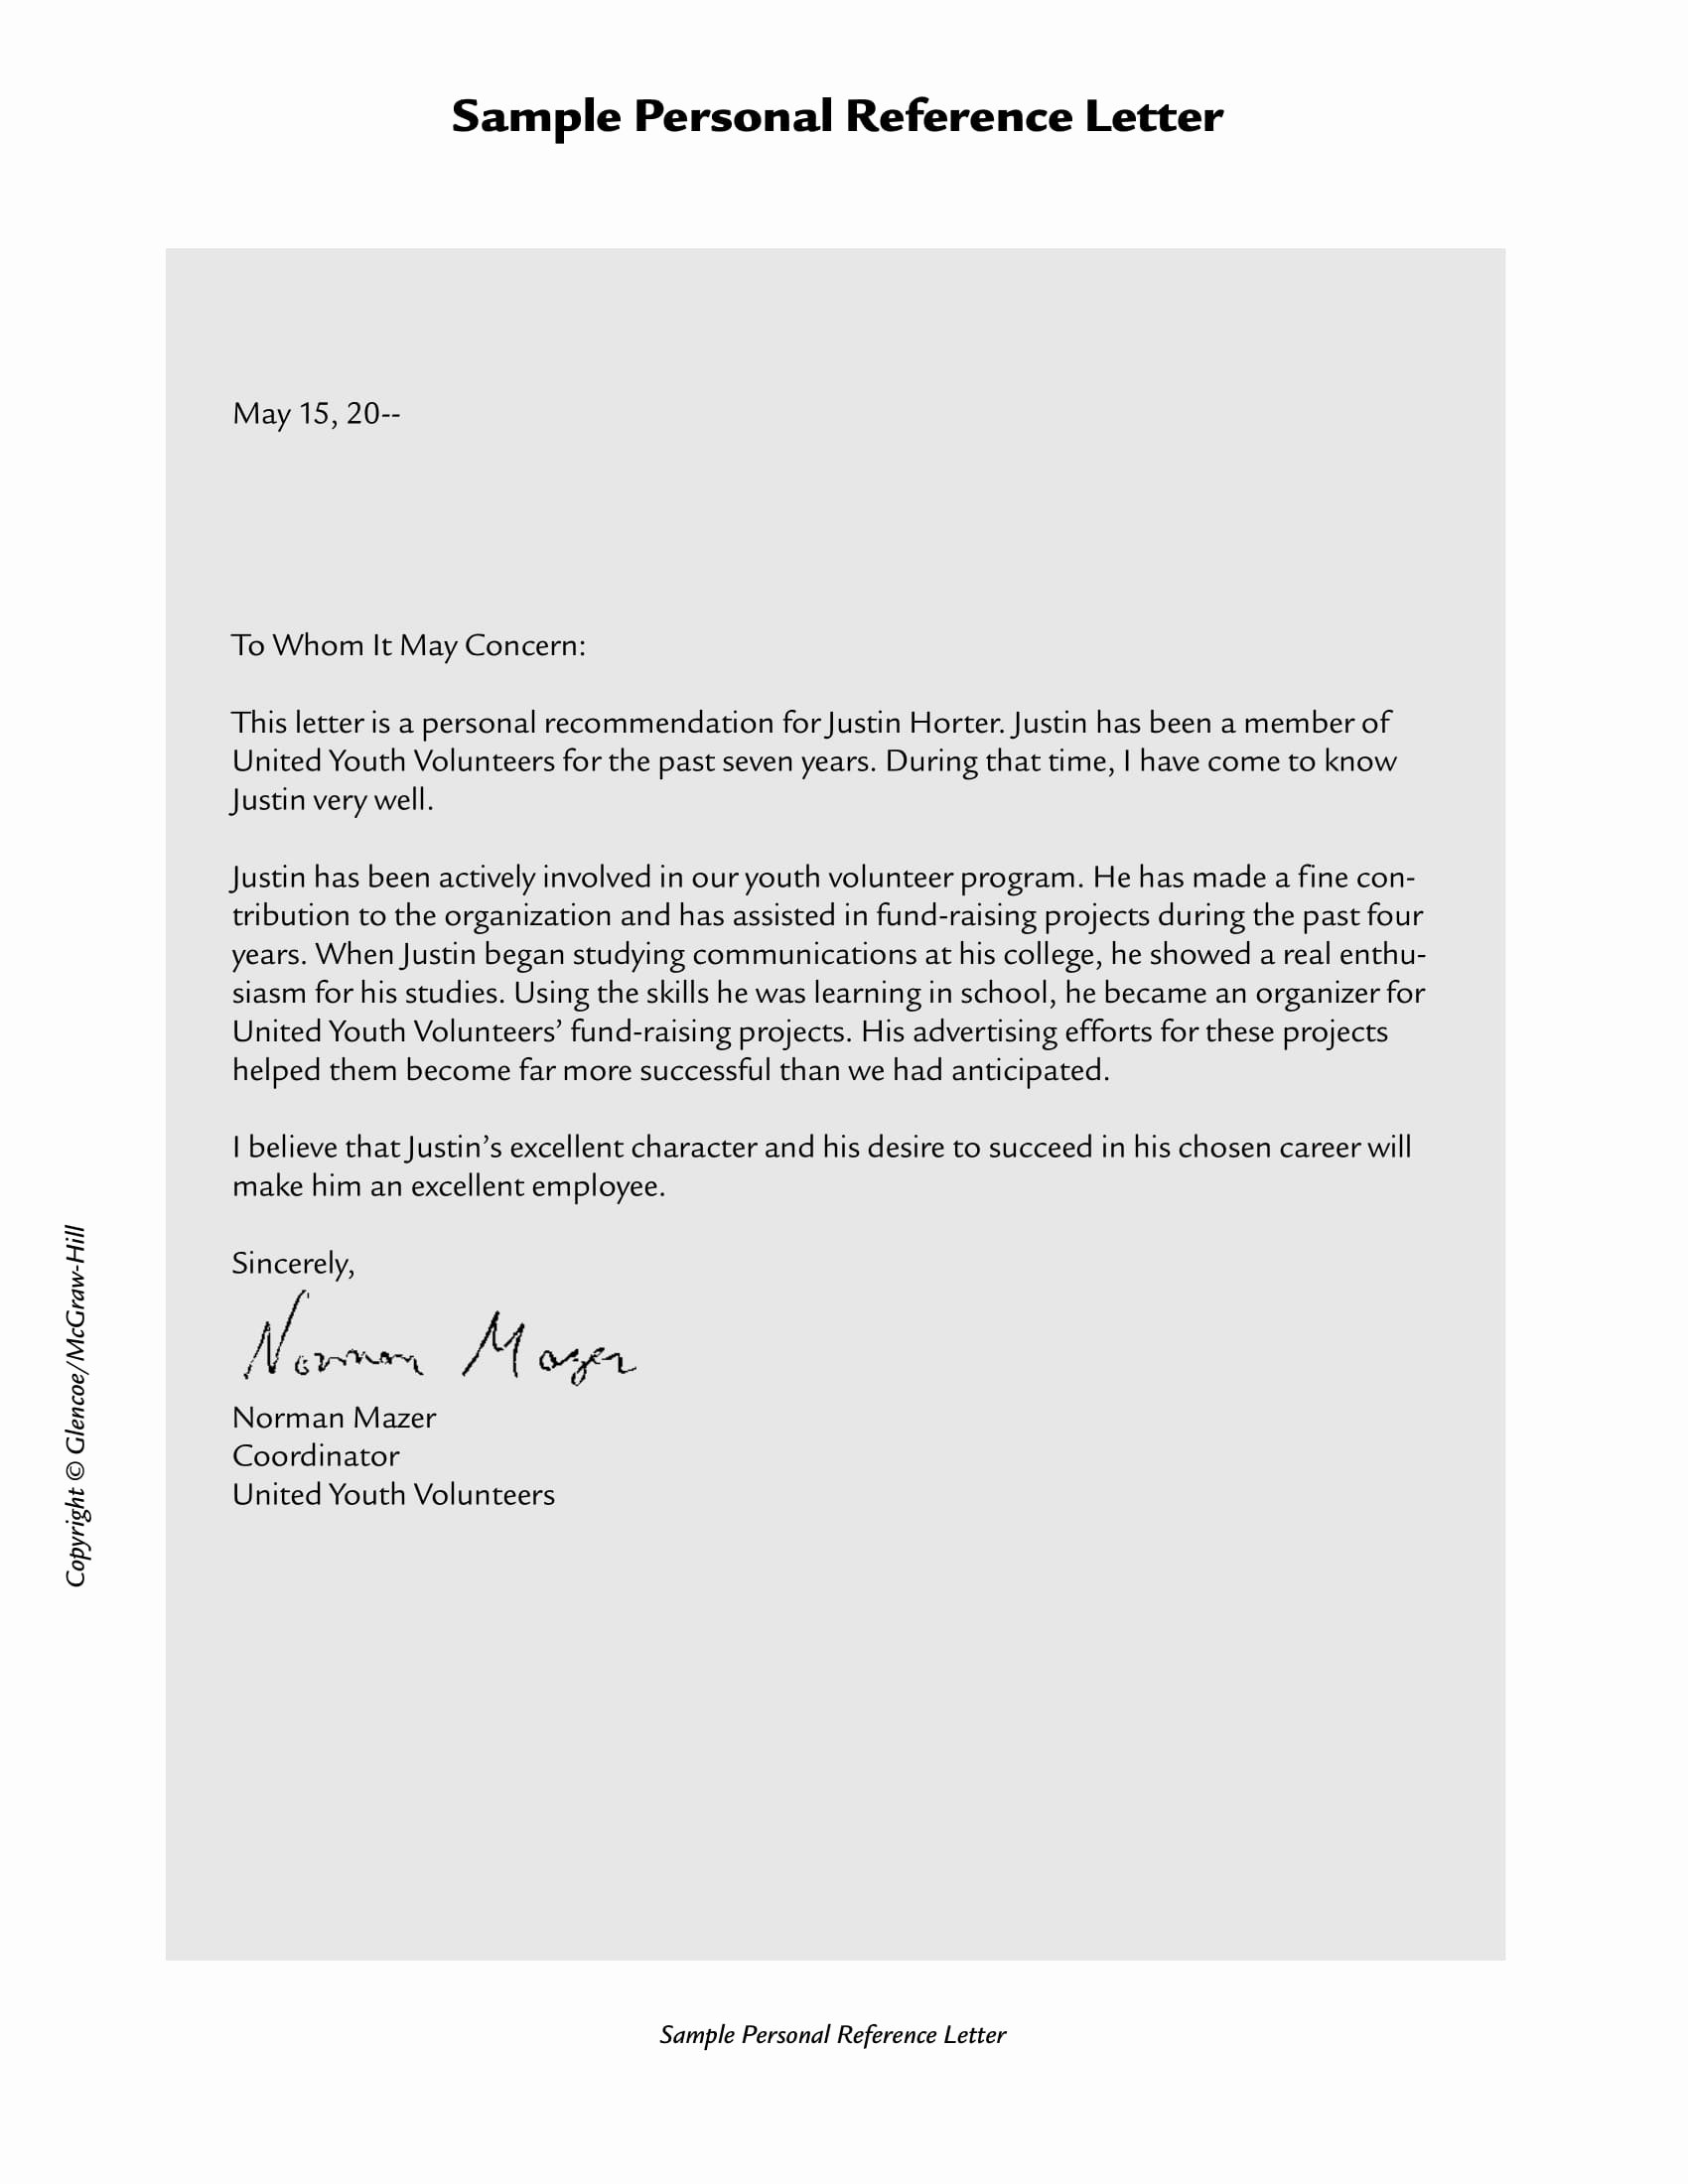 Personal Letters Of Recommendation Templates Awesome 10 Personal Re Mendation Letter Examples Pdf Word